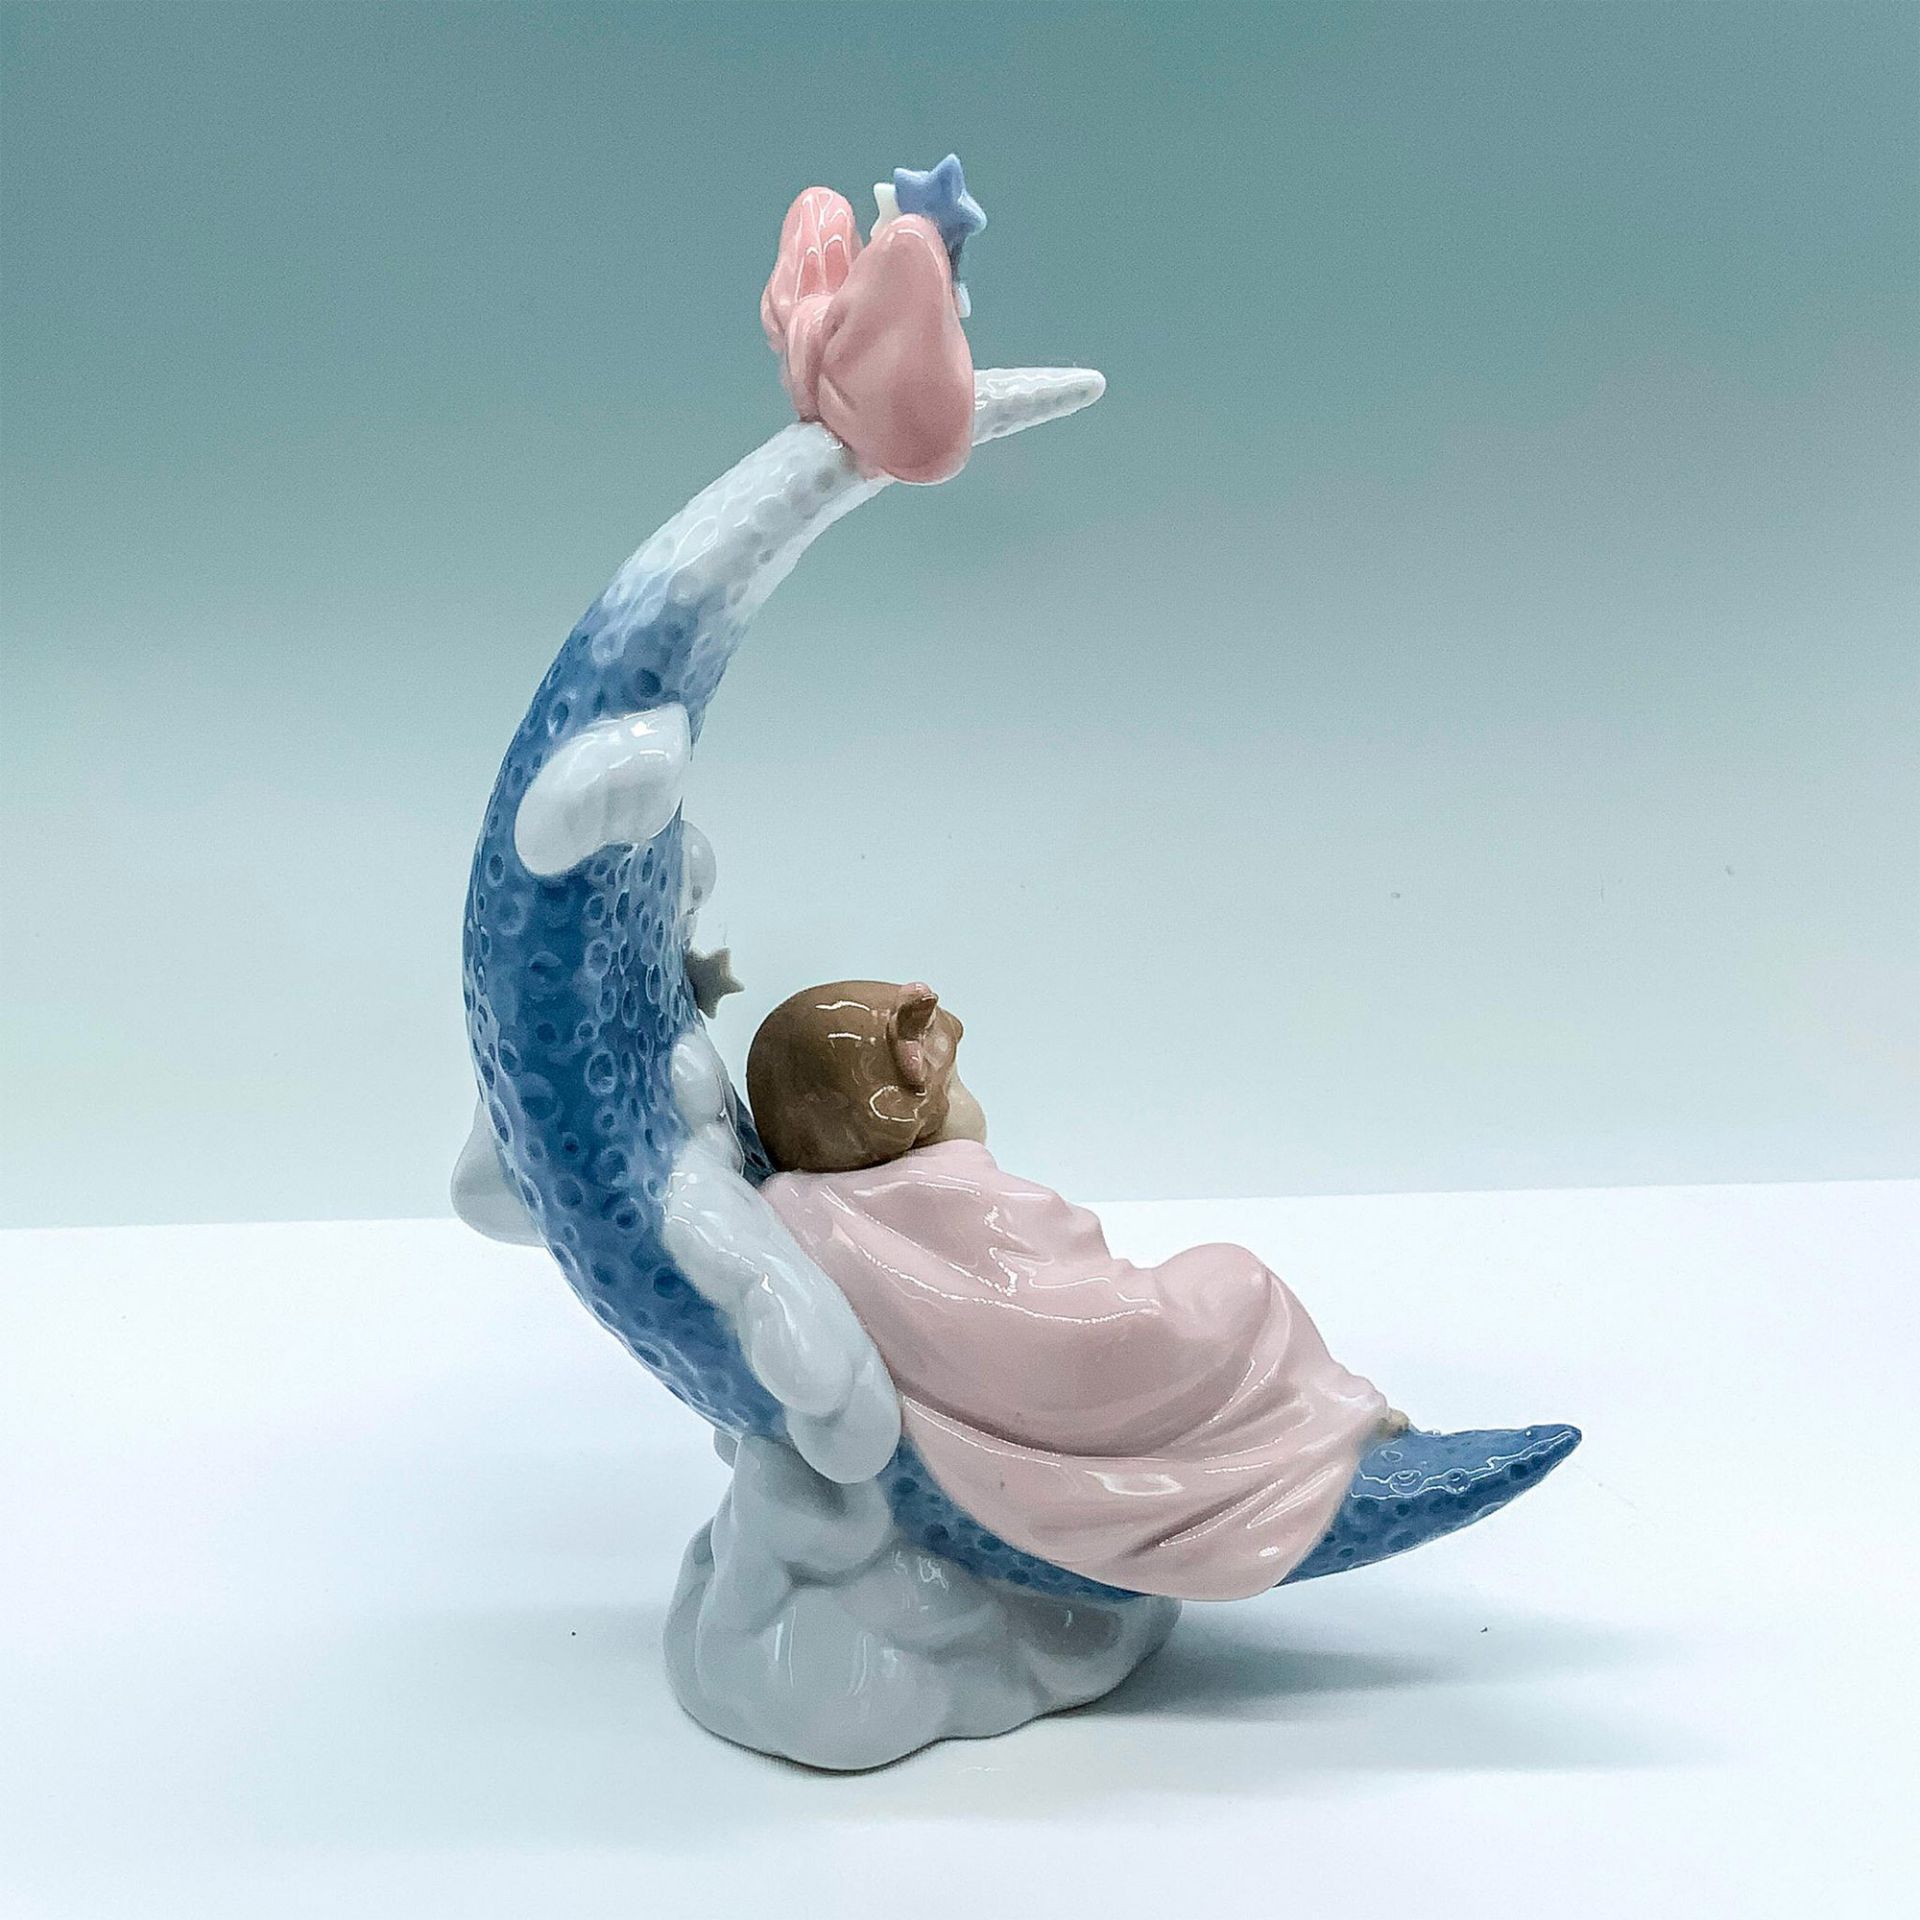 Heaven's Lullaby 1006583 - Lladro Porcelain Figurine - Image 2 of 3